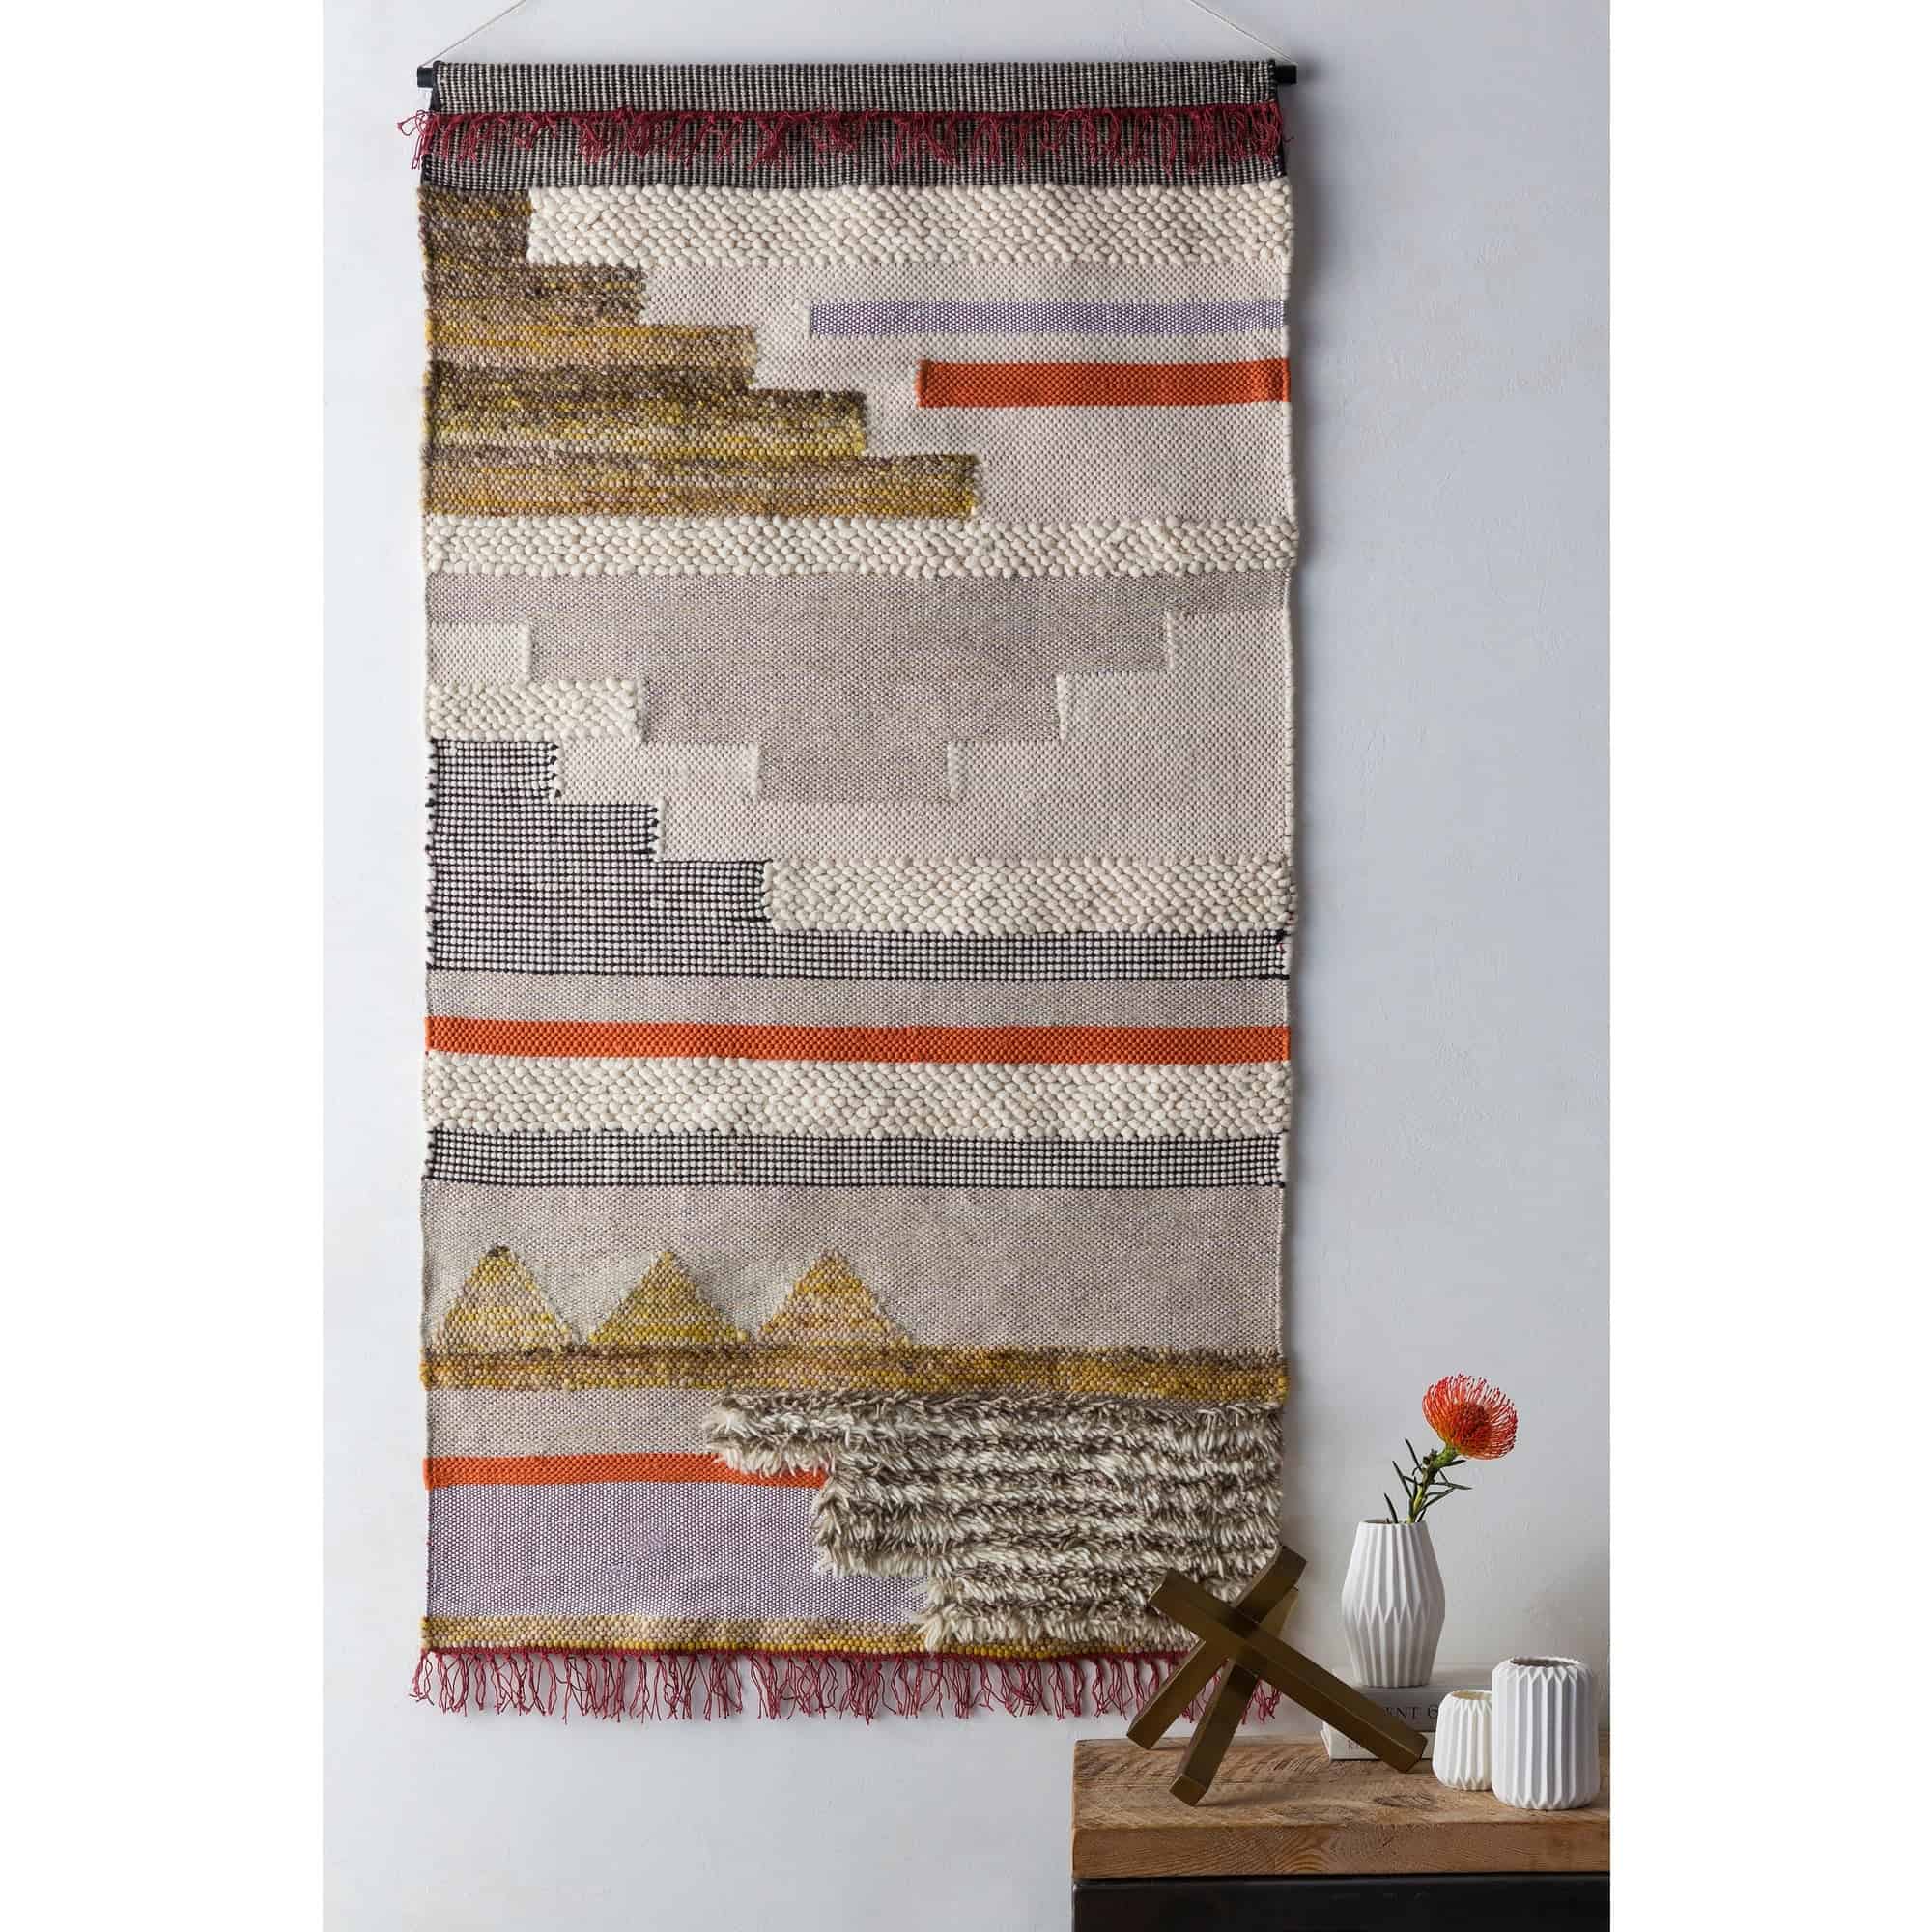 Rugs On Walls Bring Identity To Your Home